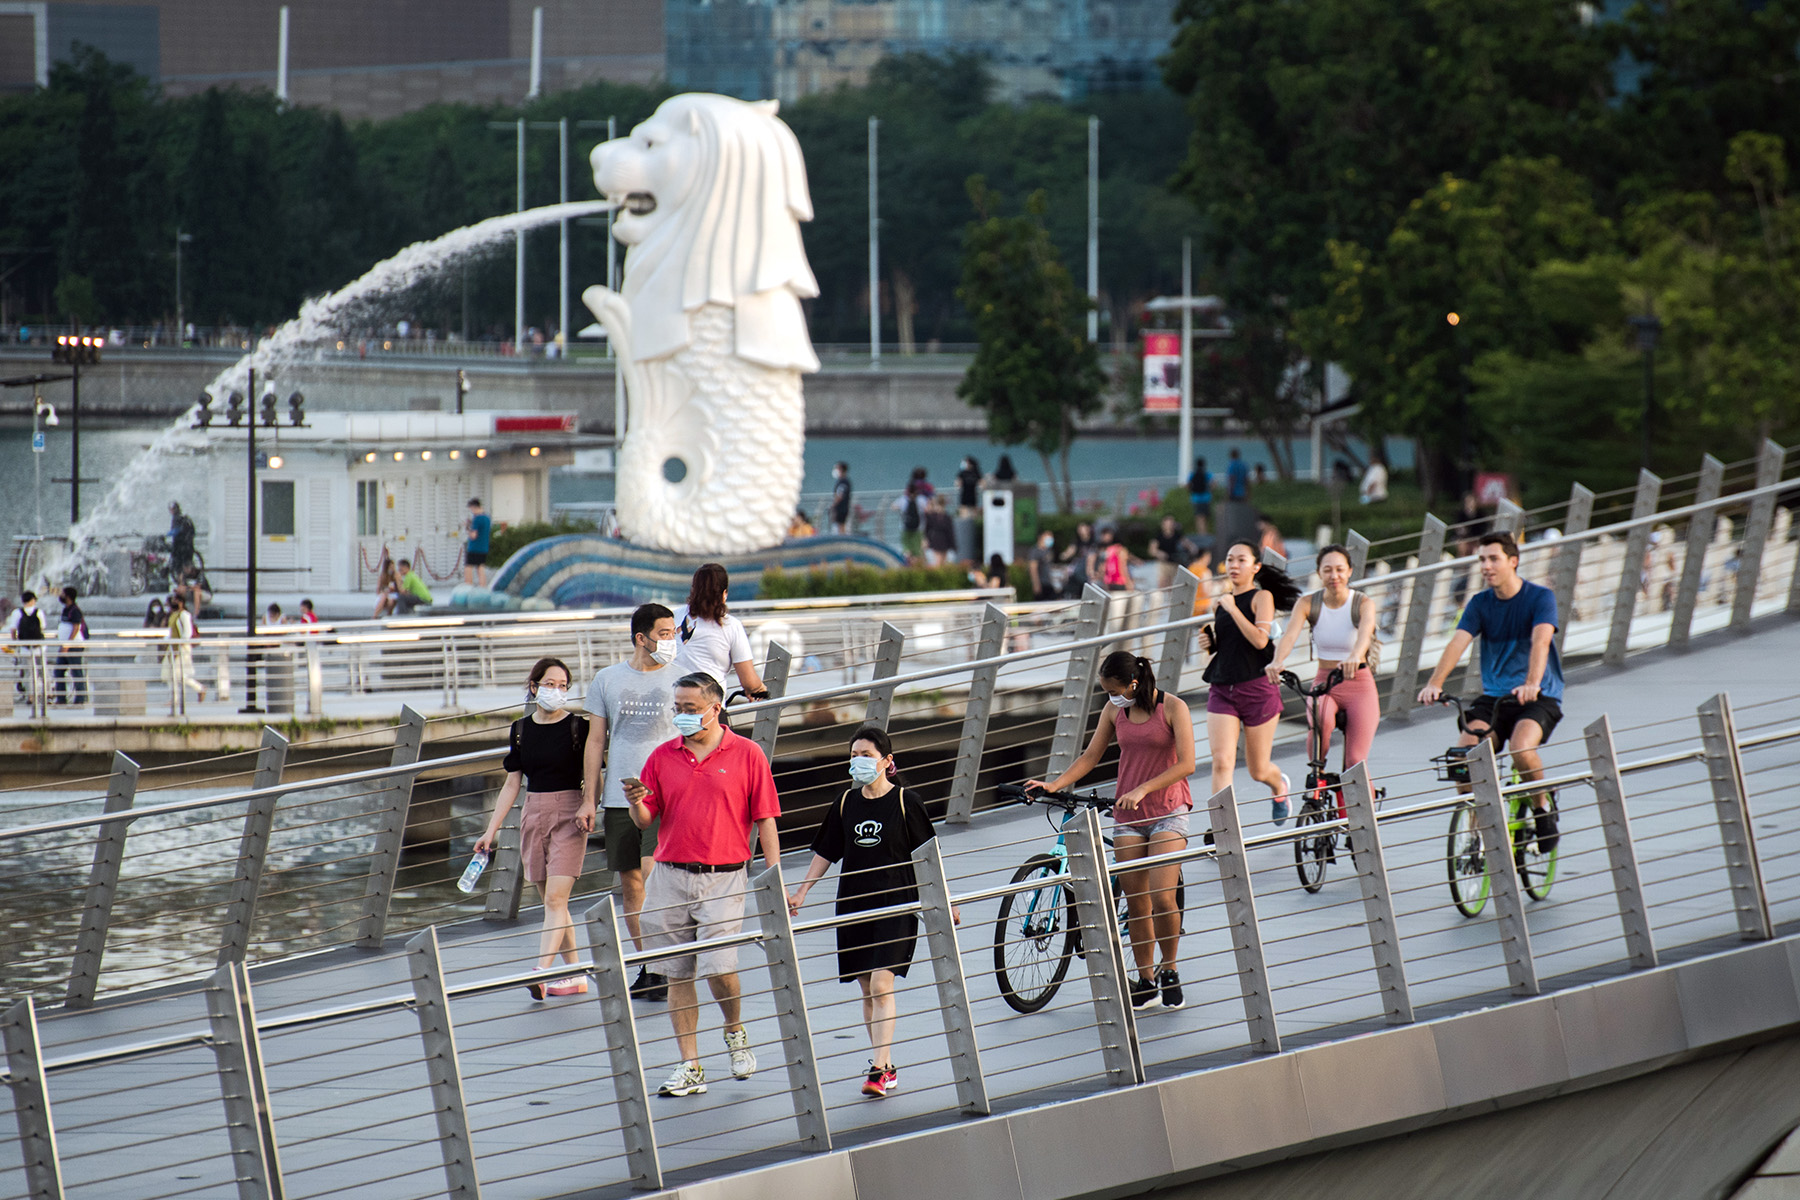 Pedestrians and cyclists share the bridge near the Merlion of Marina Bay in Singapore.